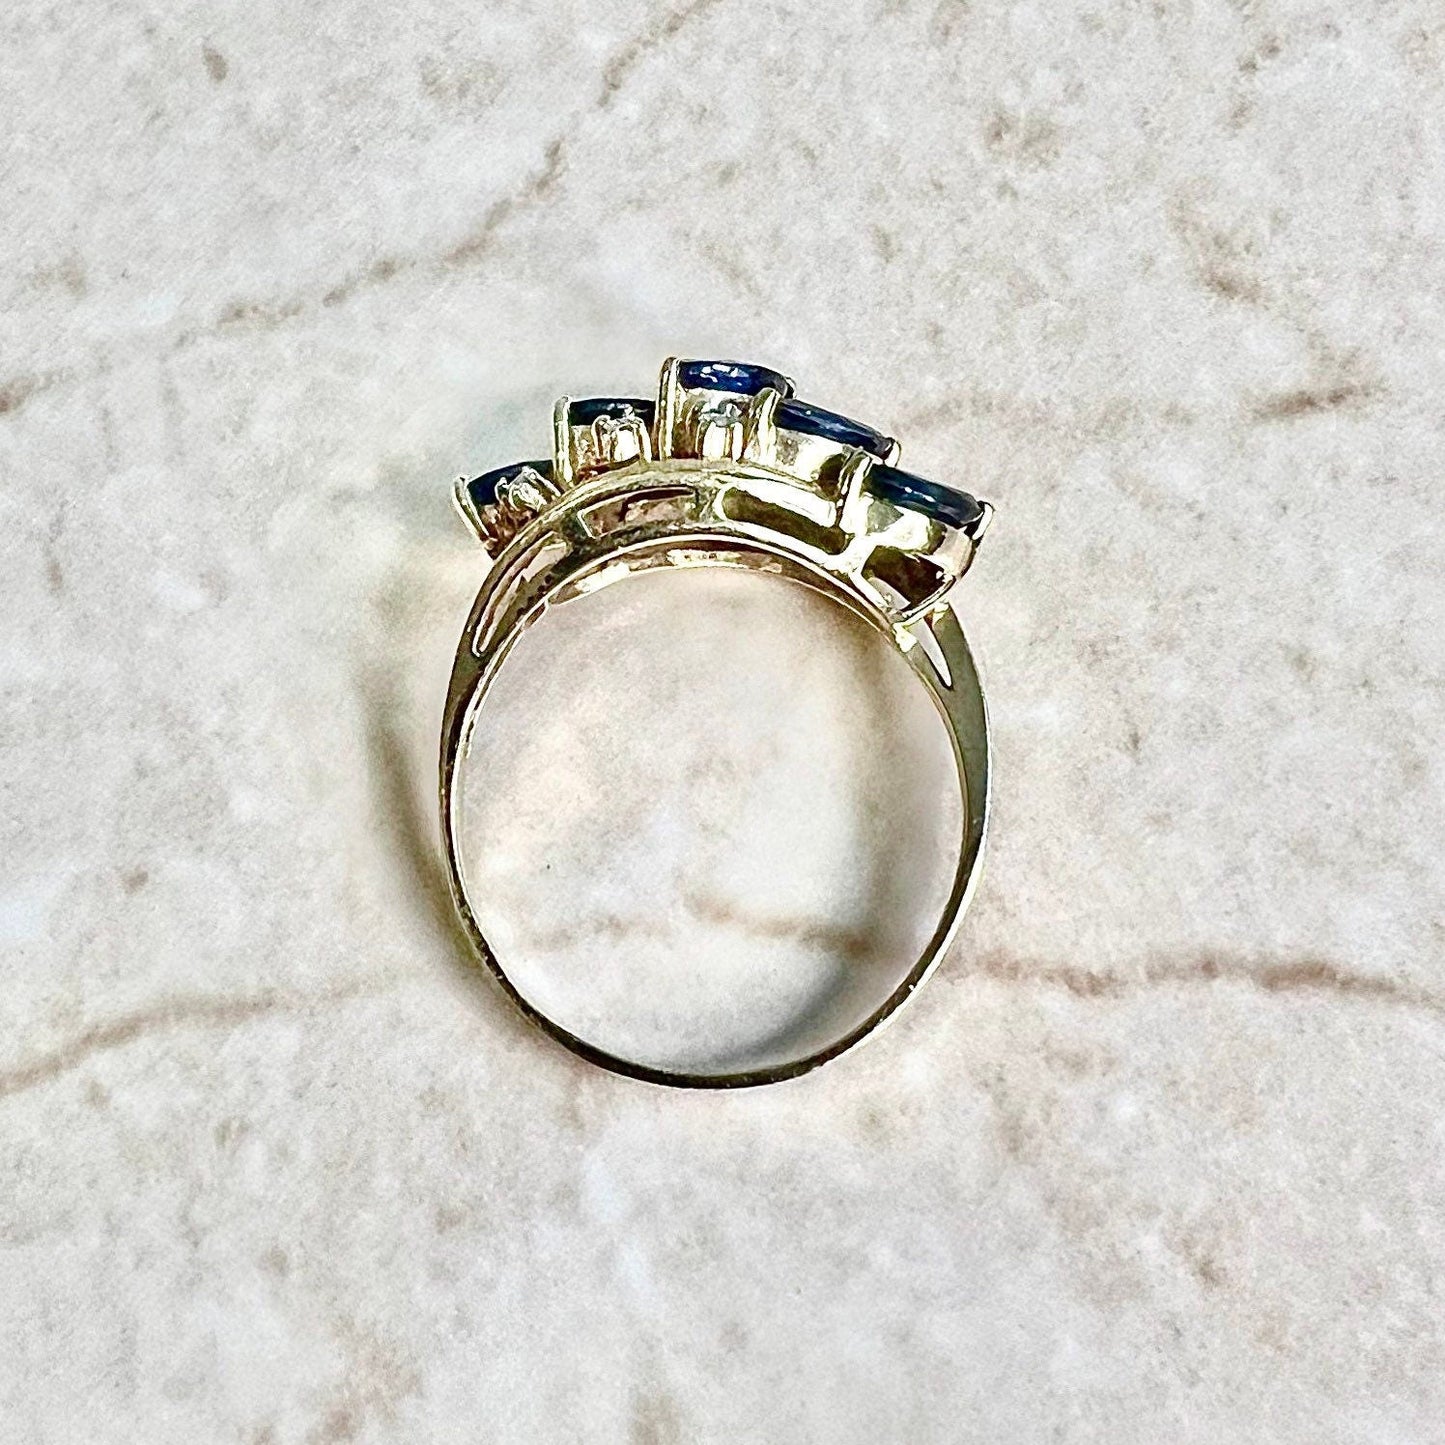 Vintage 14K Diamond & Sapphire Band Ring - Yellow Gold Sapphire Ring - Cocktail Ring - September Birthstone -Birthday Gift-Best Gift For Her